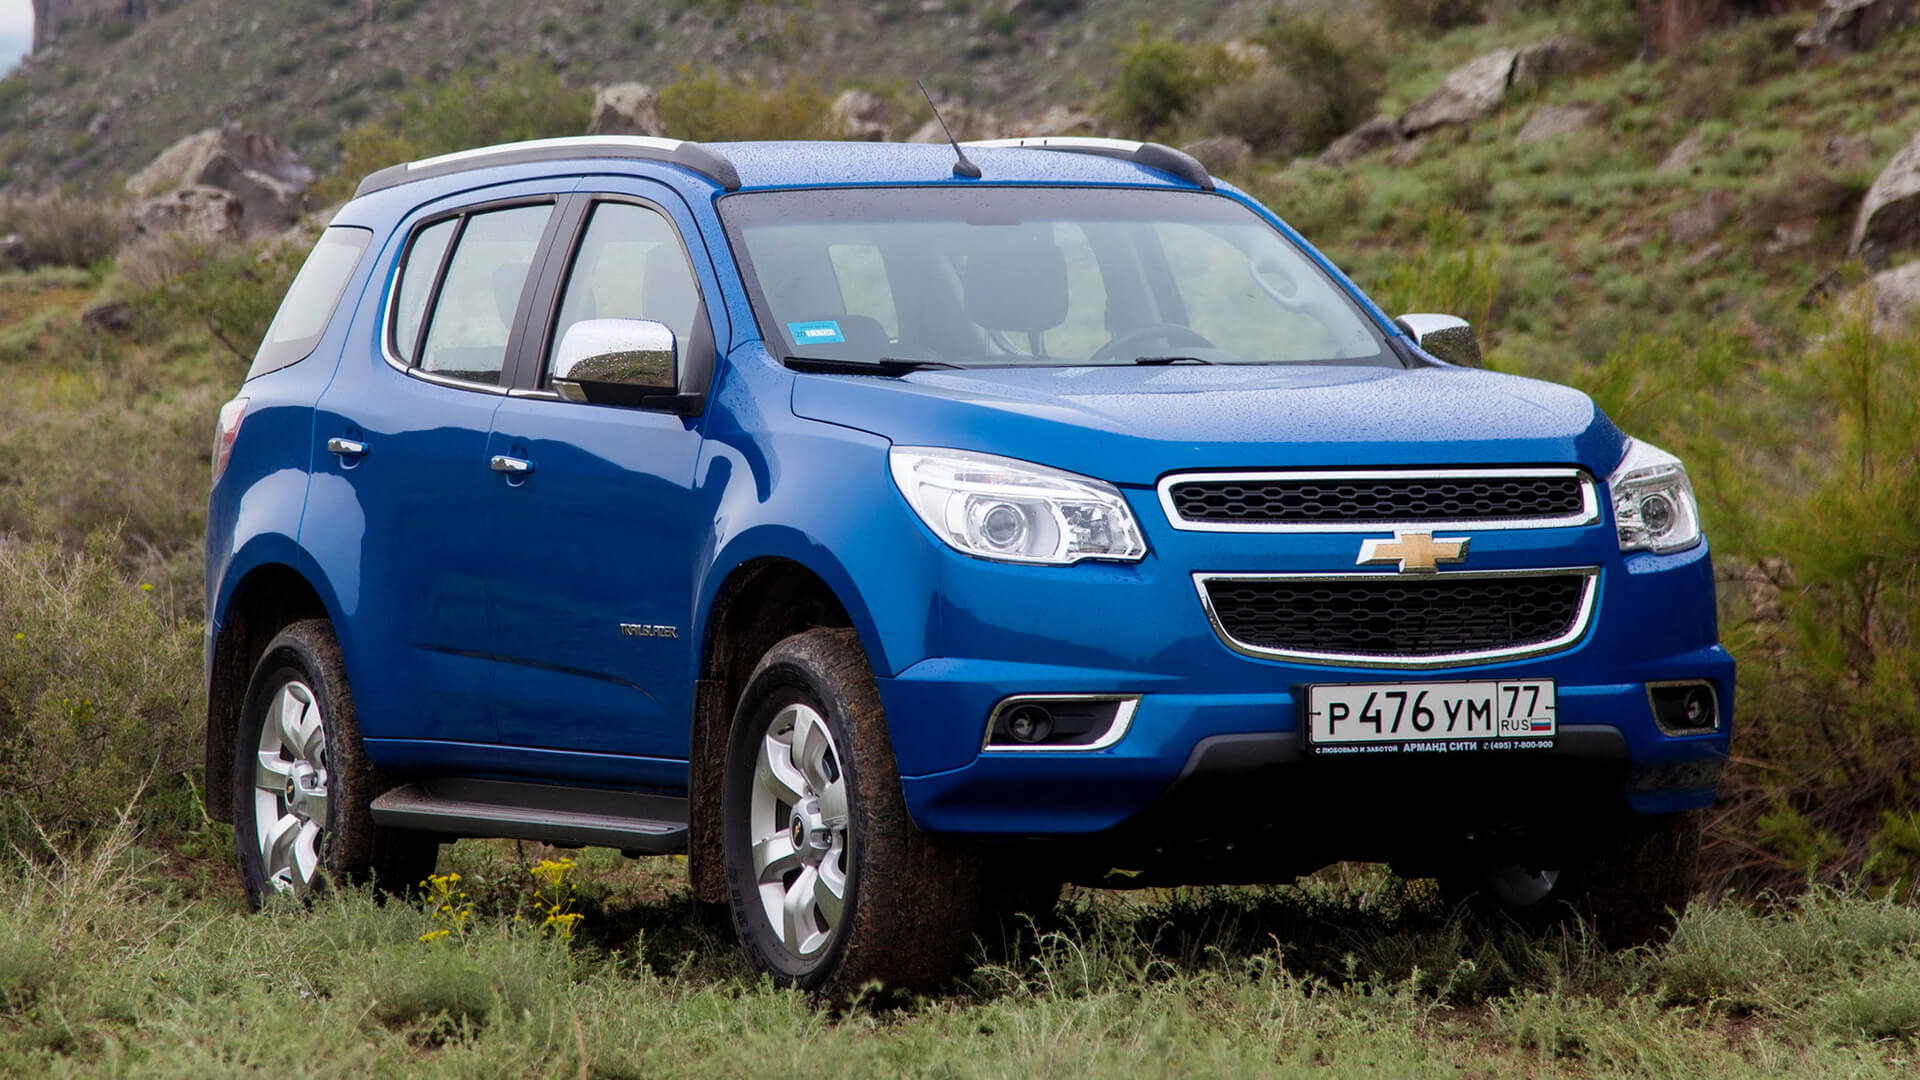 yes-the-chevrolet-trailblazer-works-as-a-pickup-just-fine-carscoops